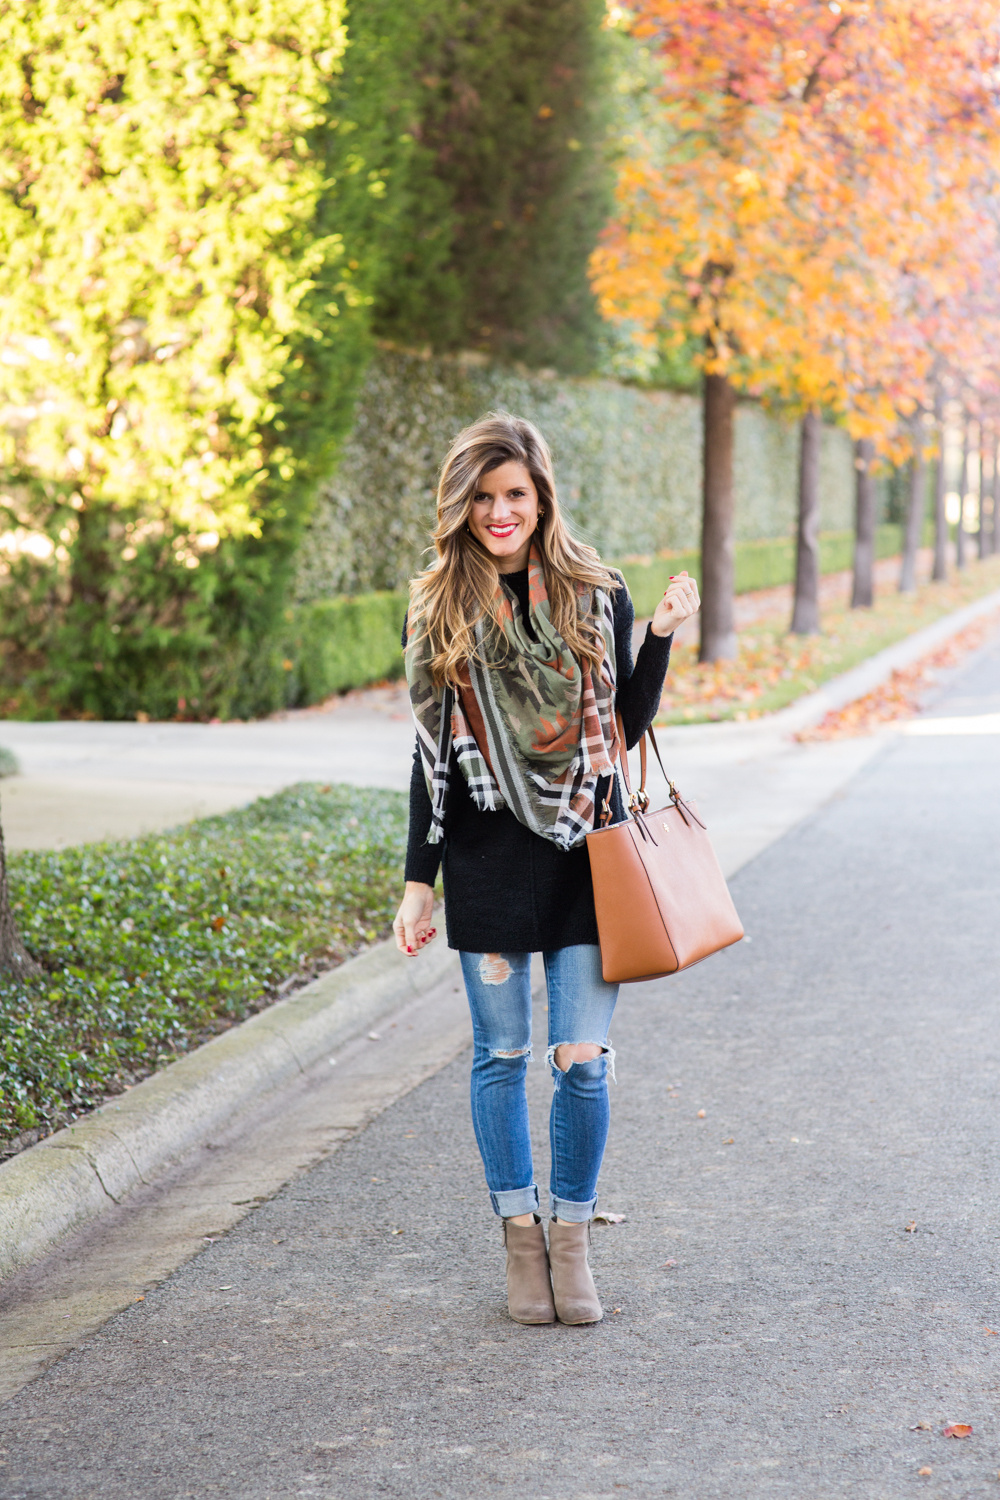 jeans and booties outfit